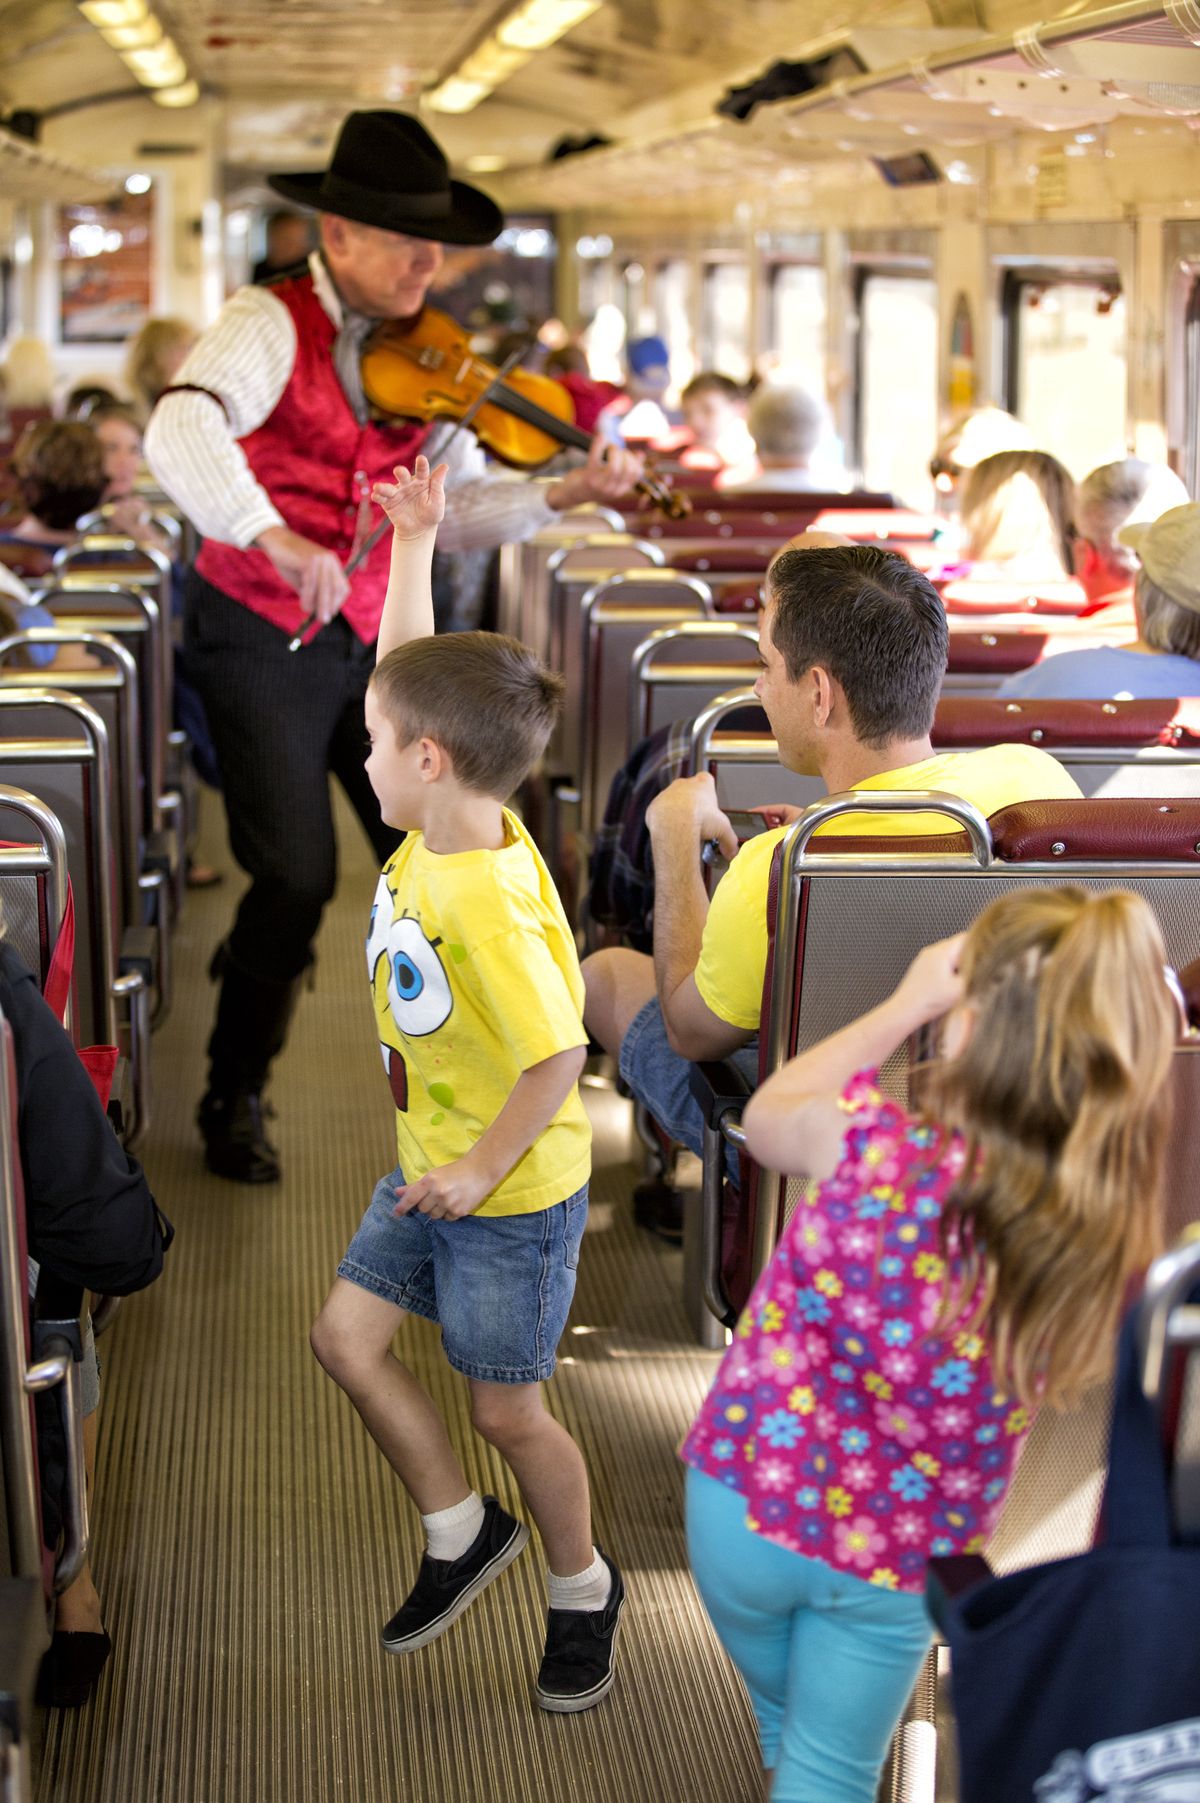 A performer plays violin onboard the railway train on its daily run between Williams, Ariz., and the Grand Canyon’s South Rim. (Associated Press)